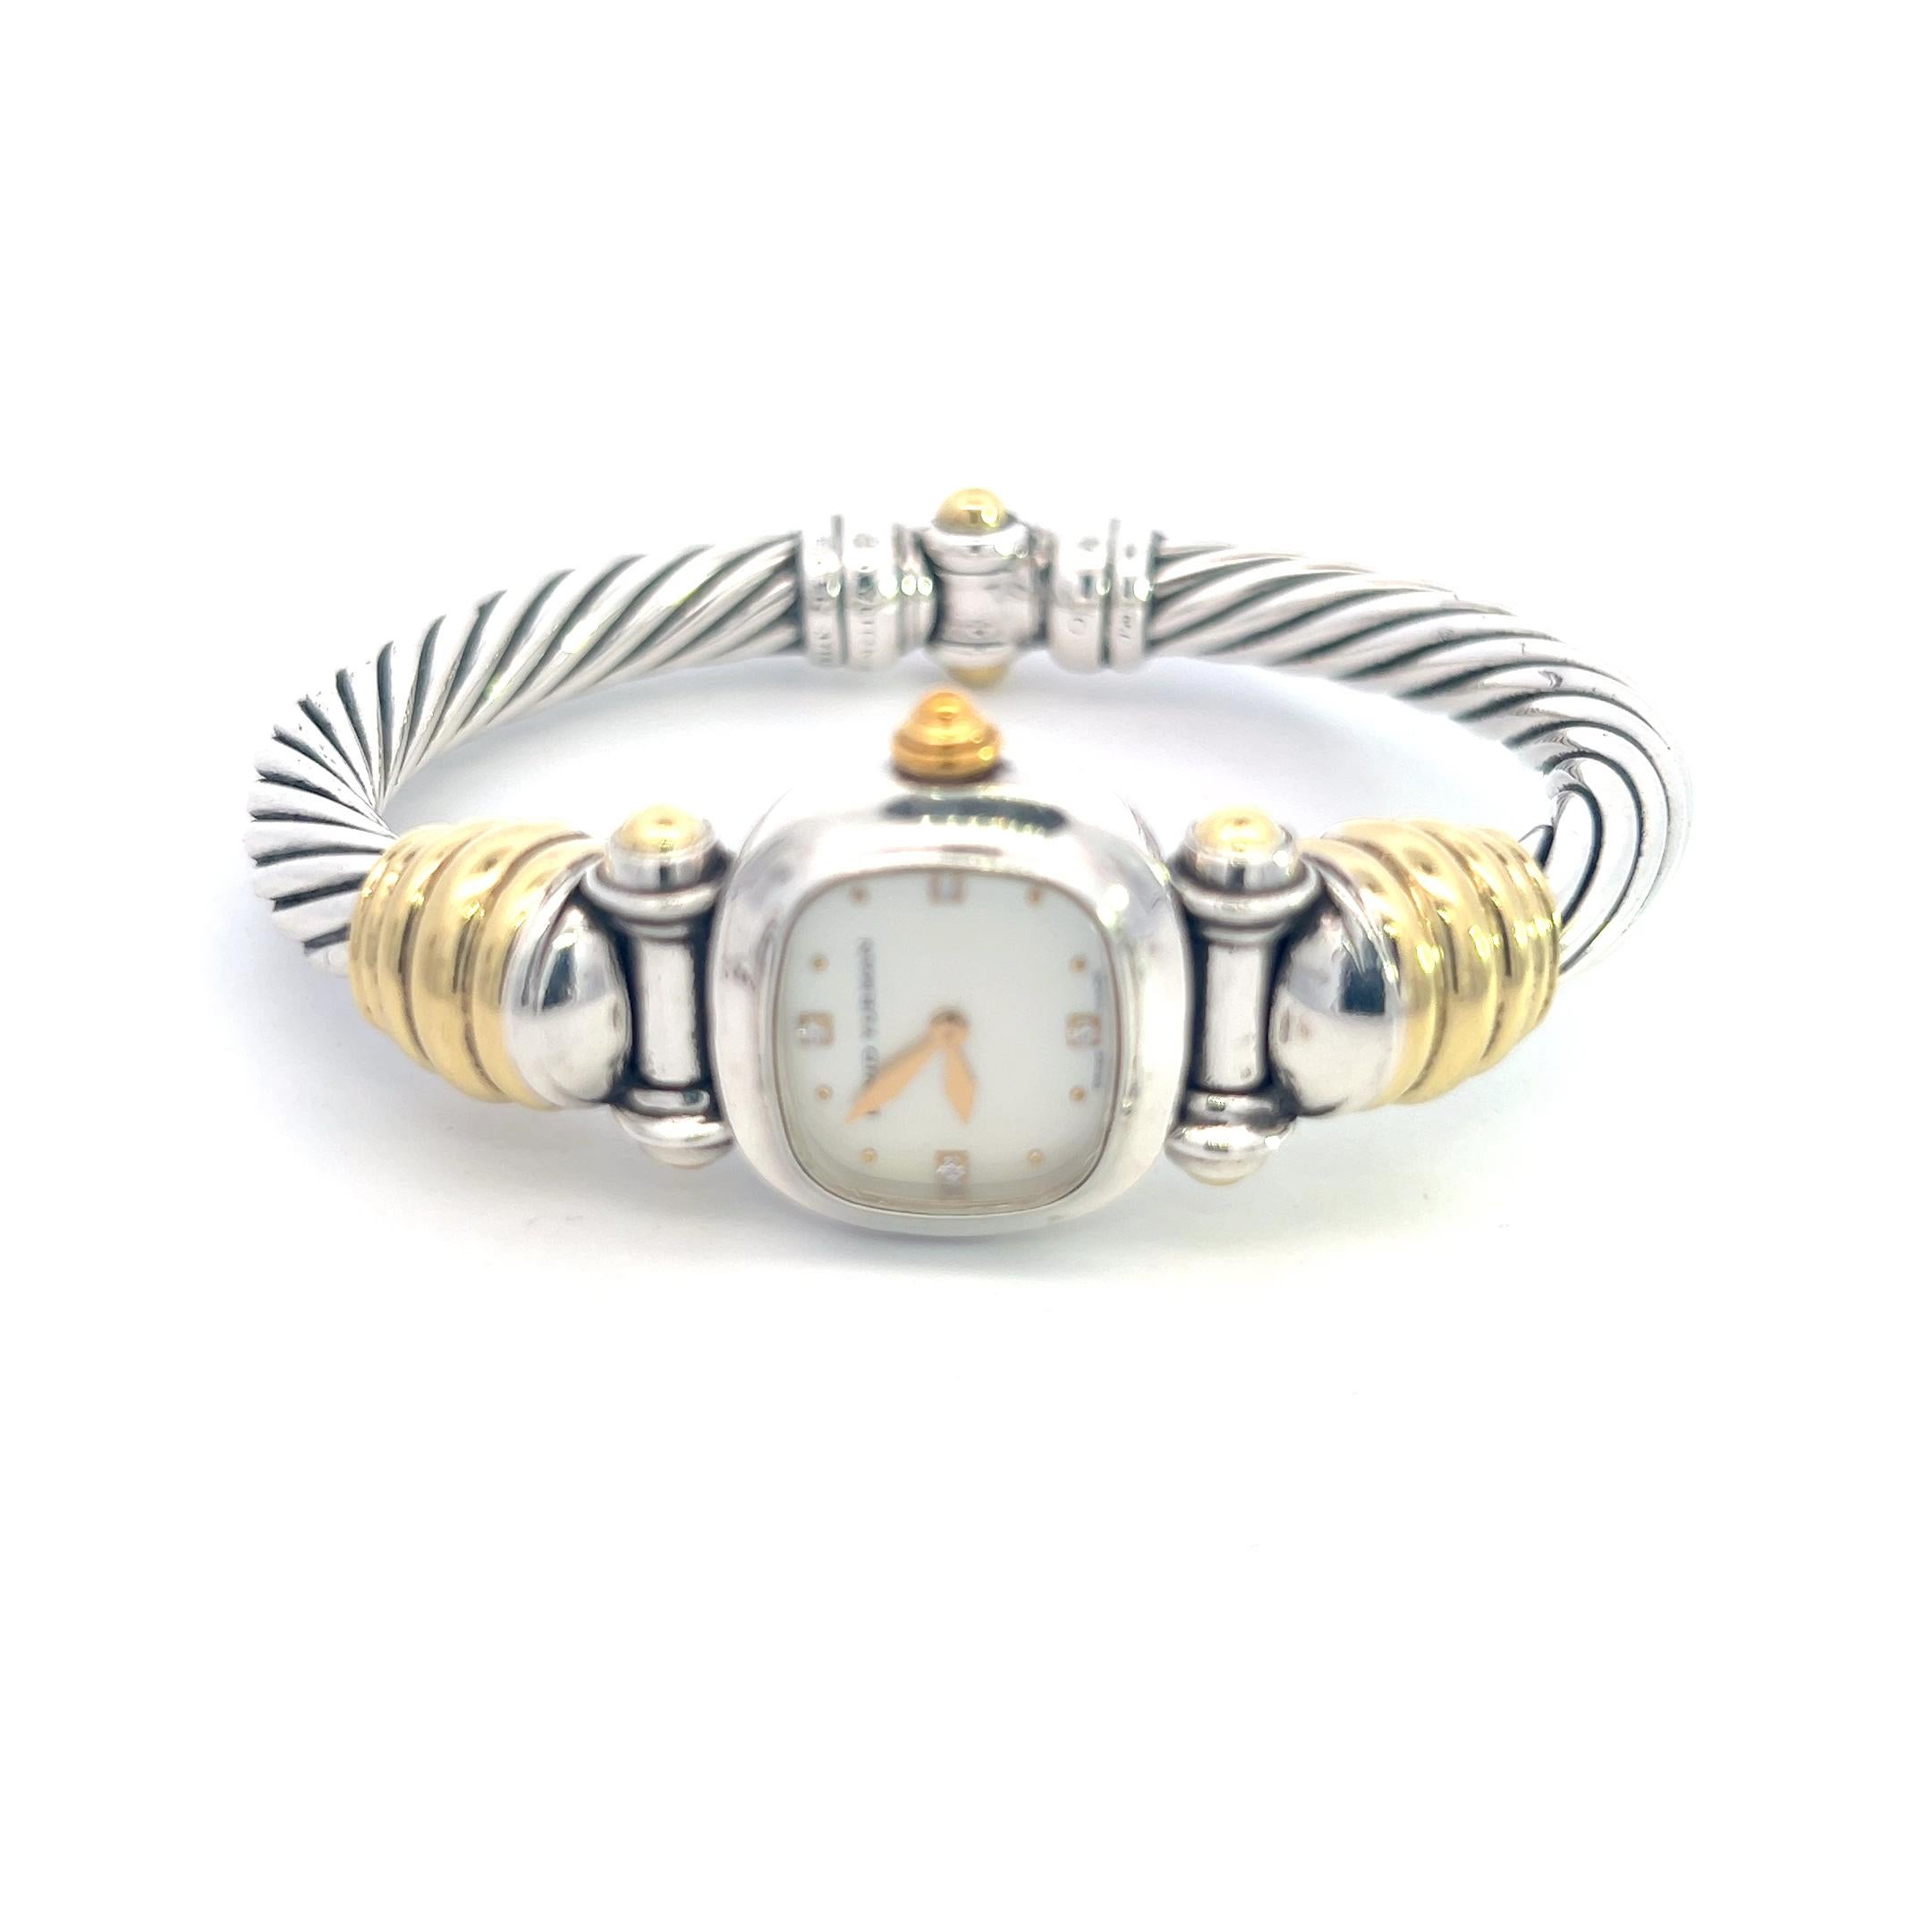 David Yurman Authentic Estate Mother of Pearl Watch 6